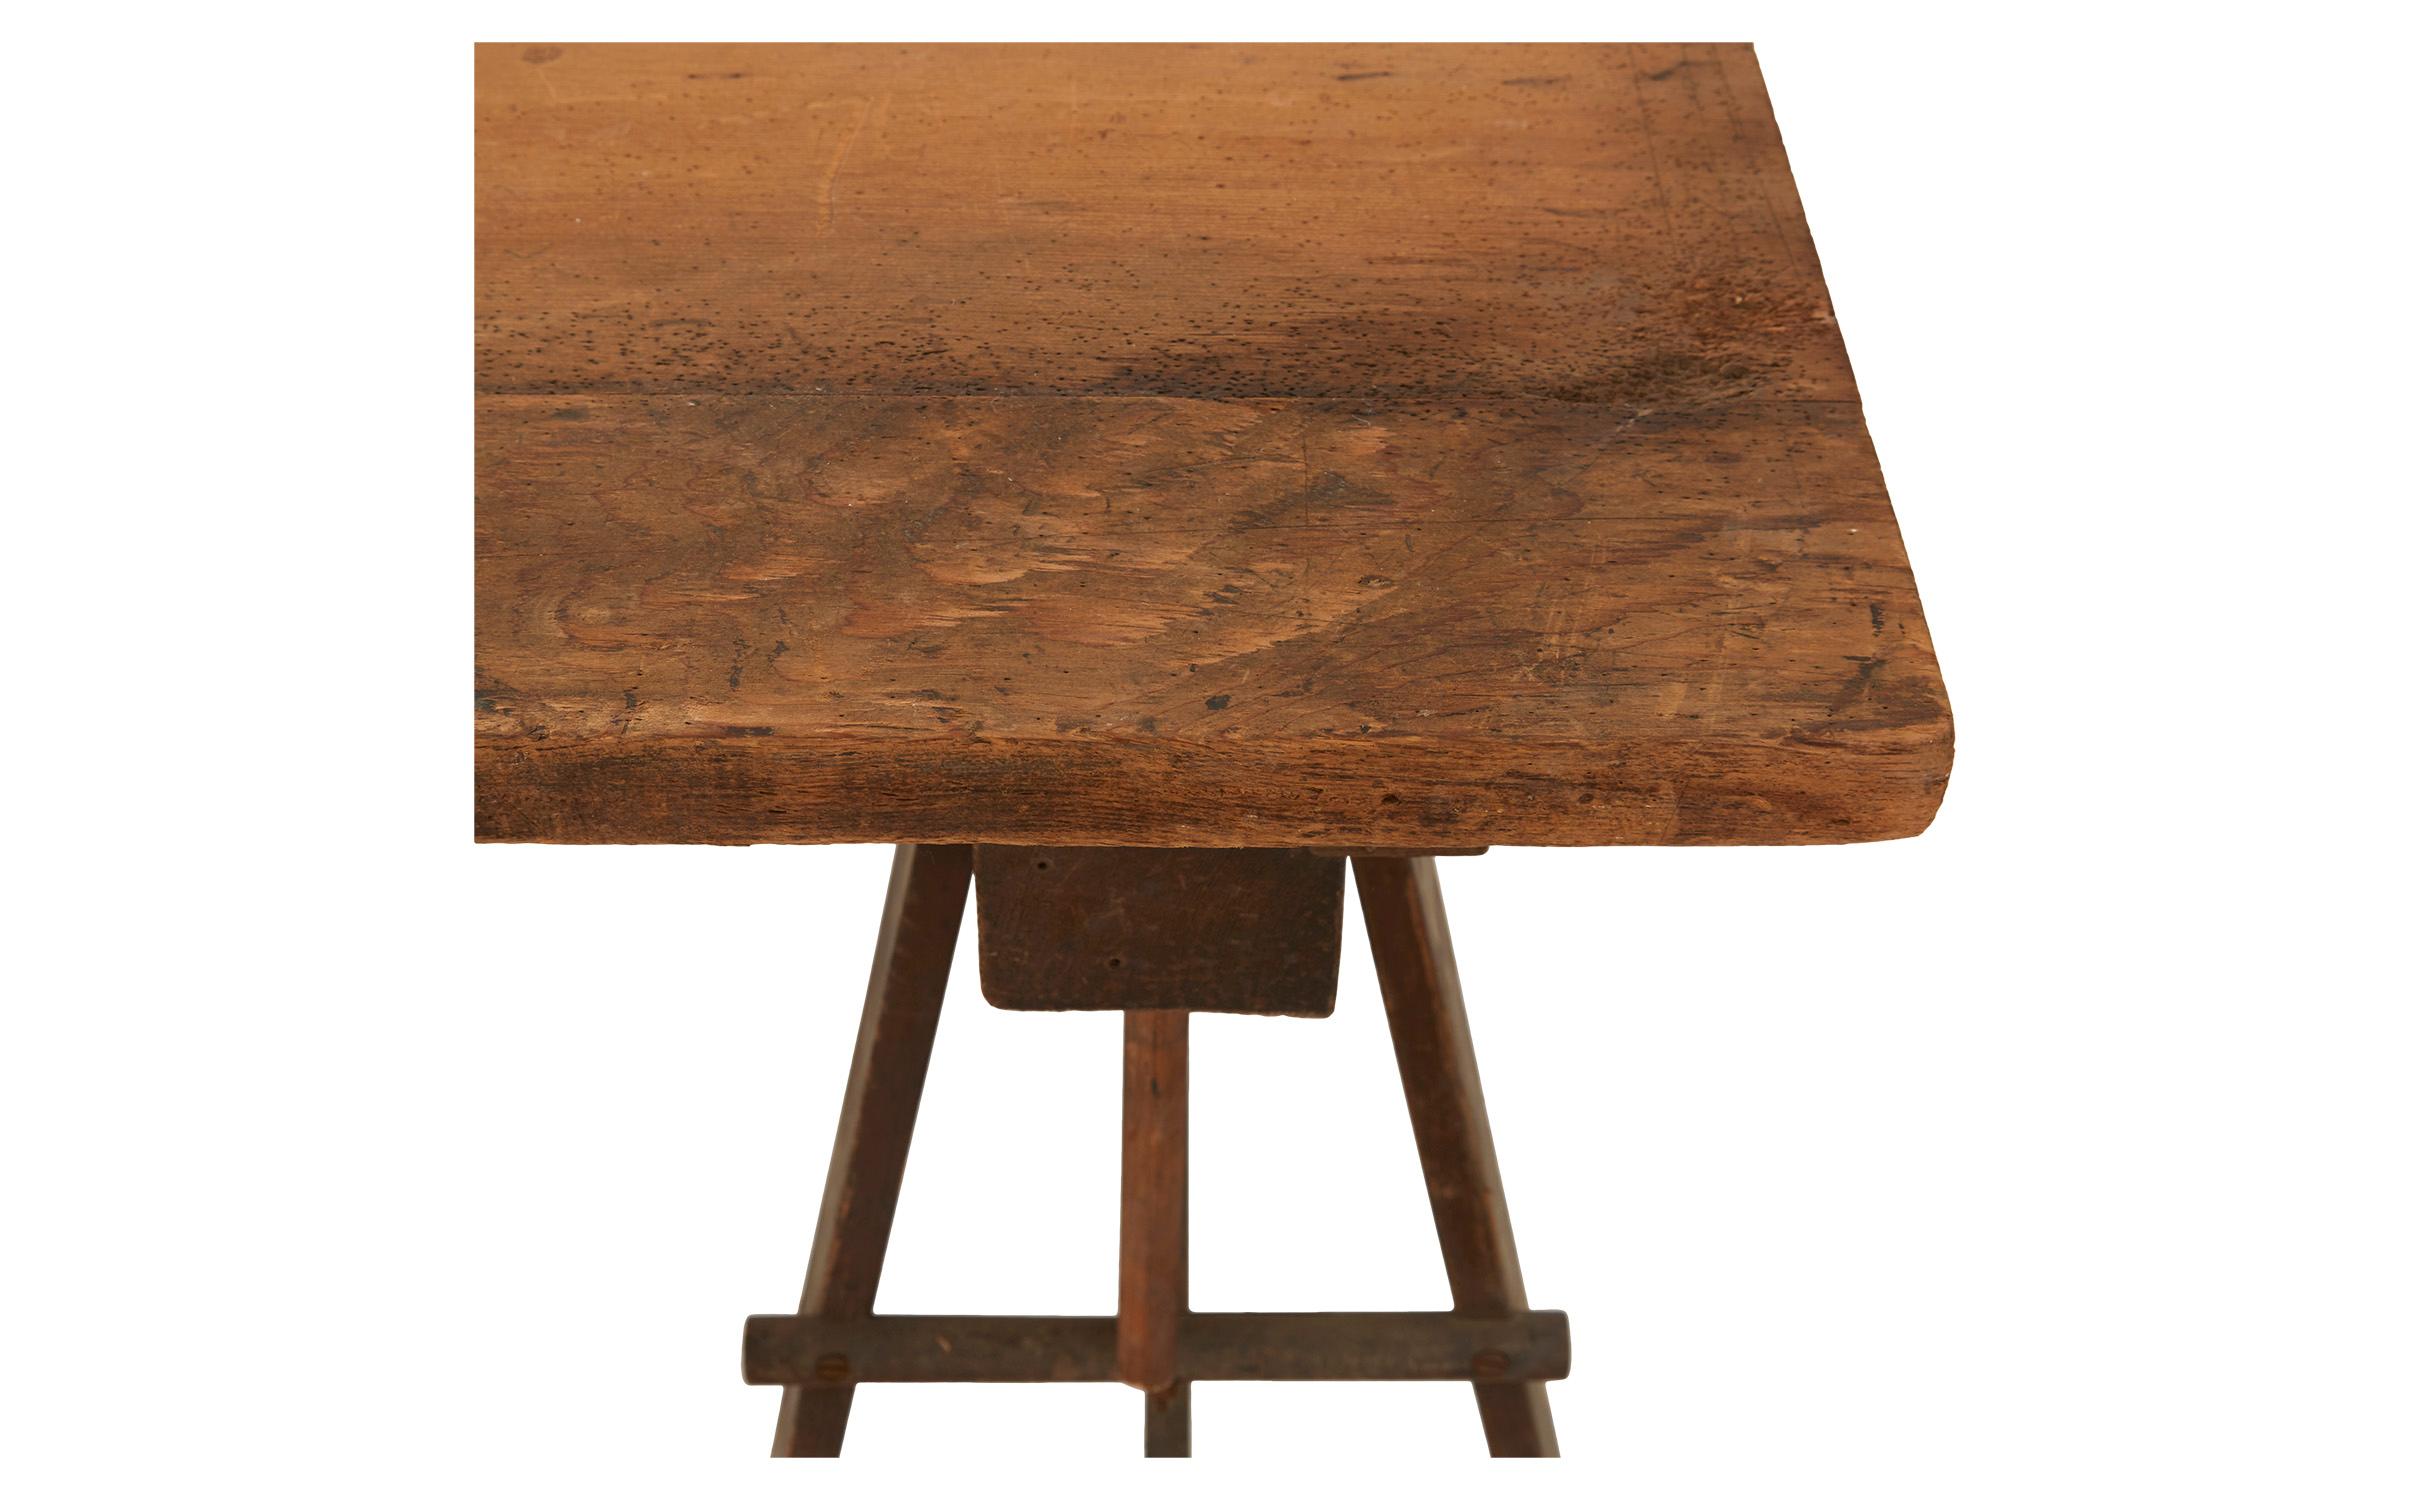 Wooden Industrial Drafting Table 2